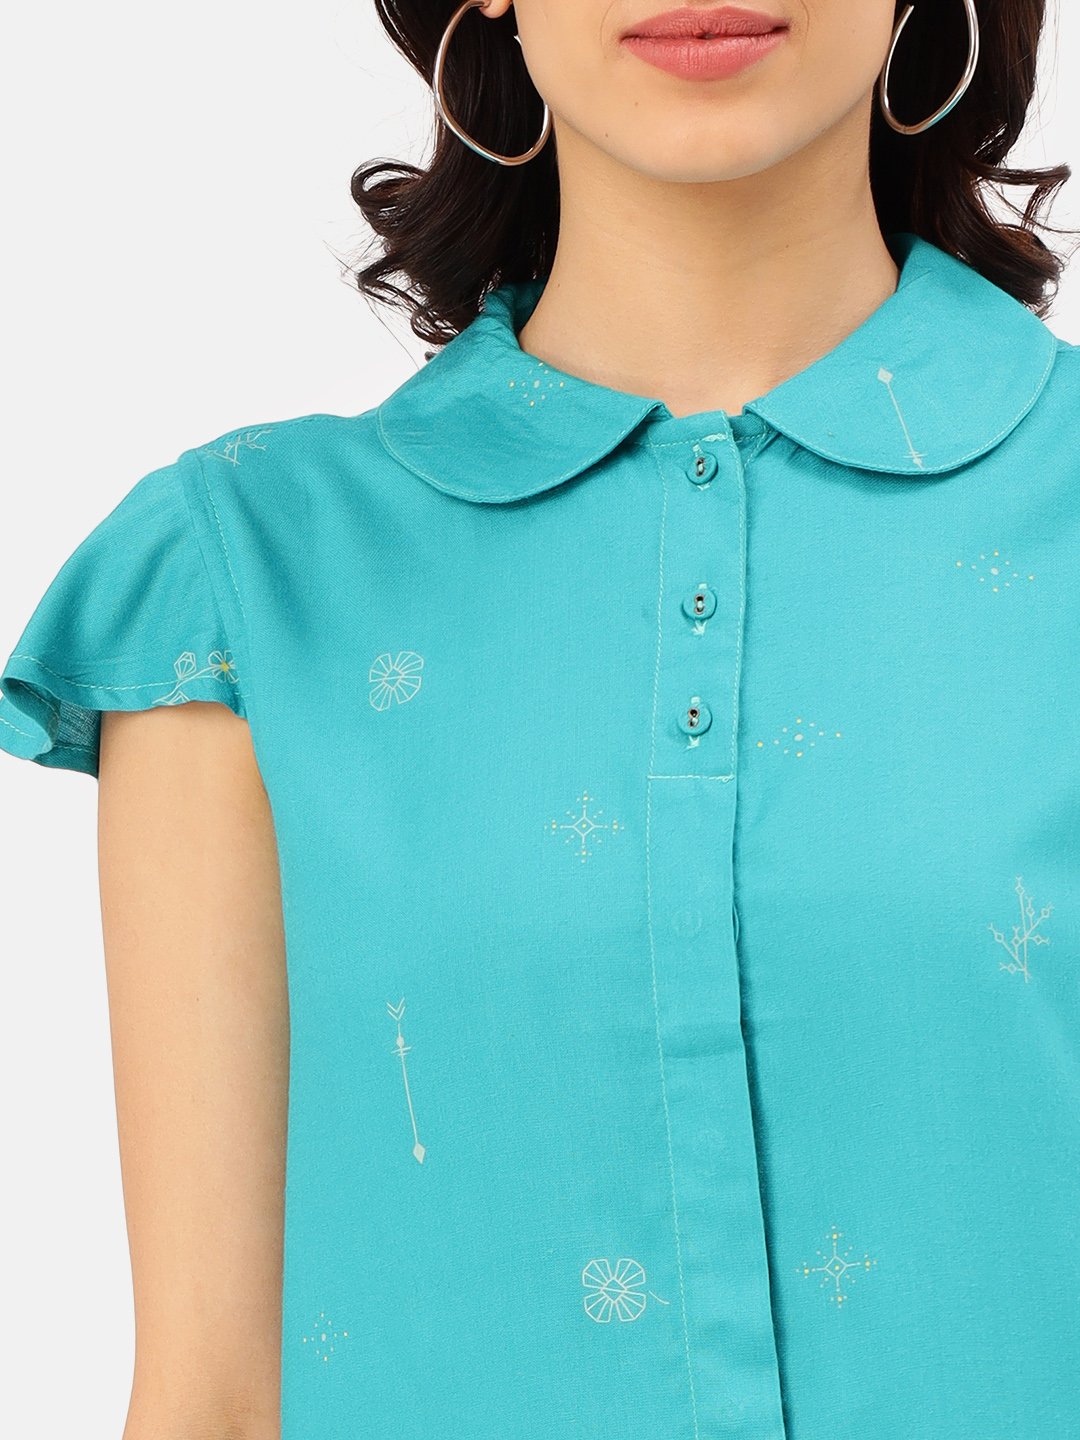 Teal_Printed_Top_Front_Close_Up_1 (6098123030697)